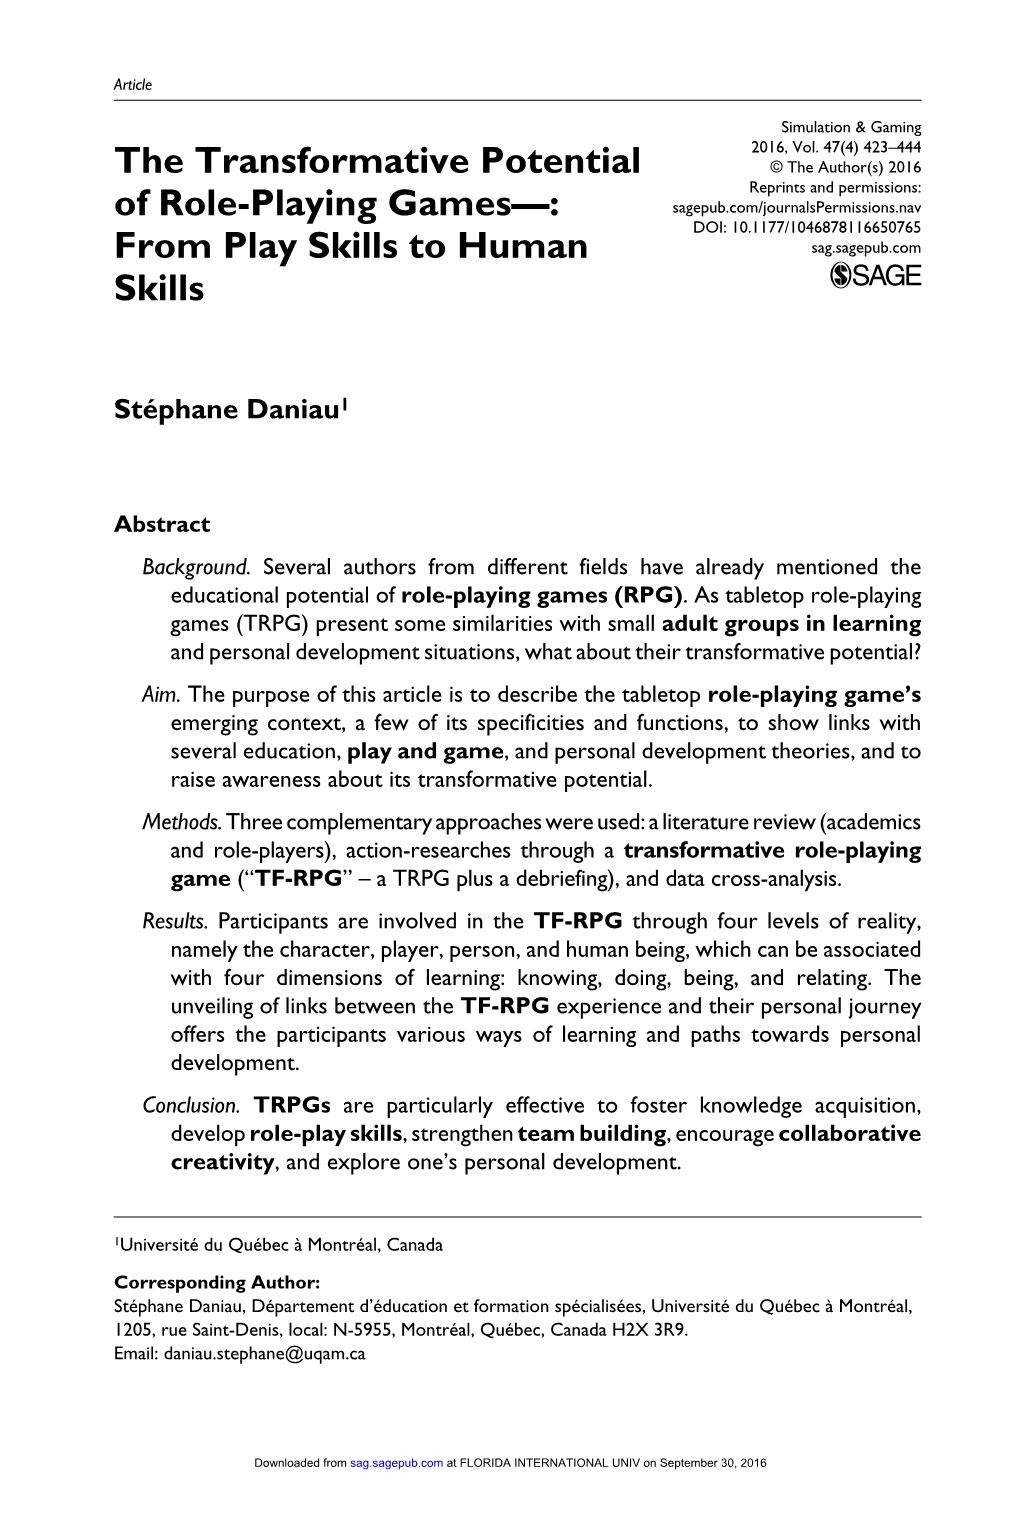 The Transformative Potential of Role-Playing Games—: from Play Skills to Human Skills